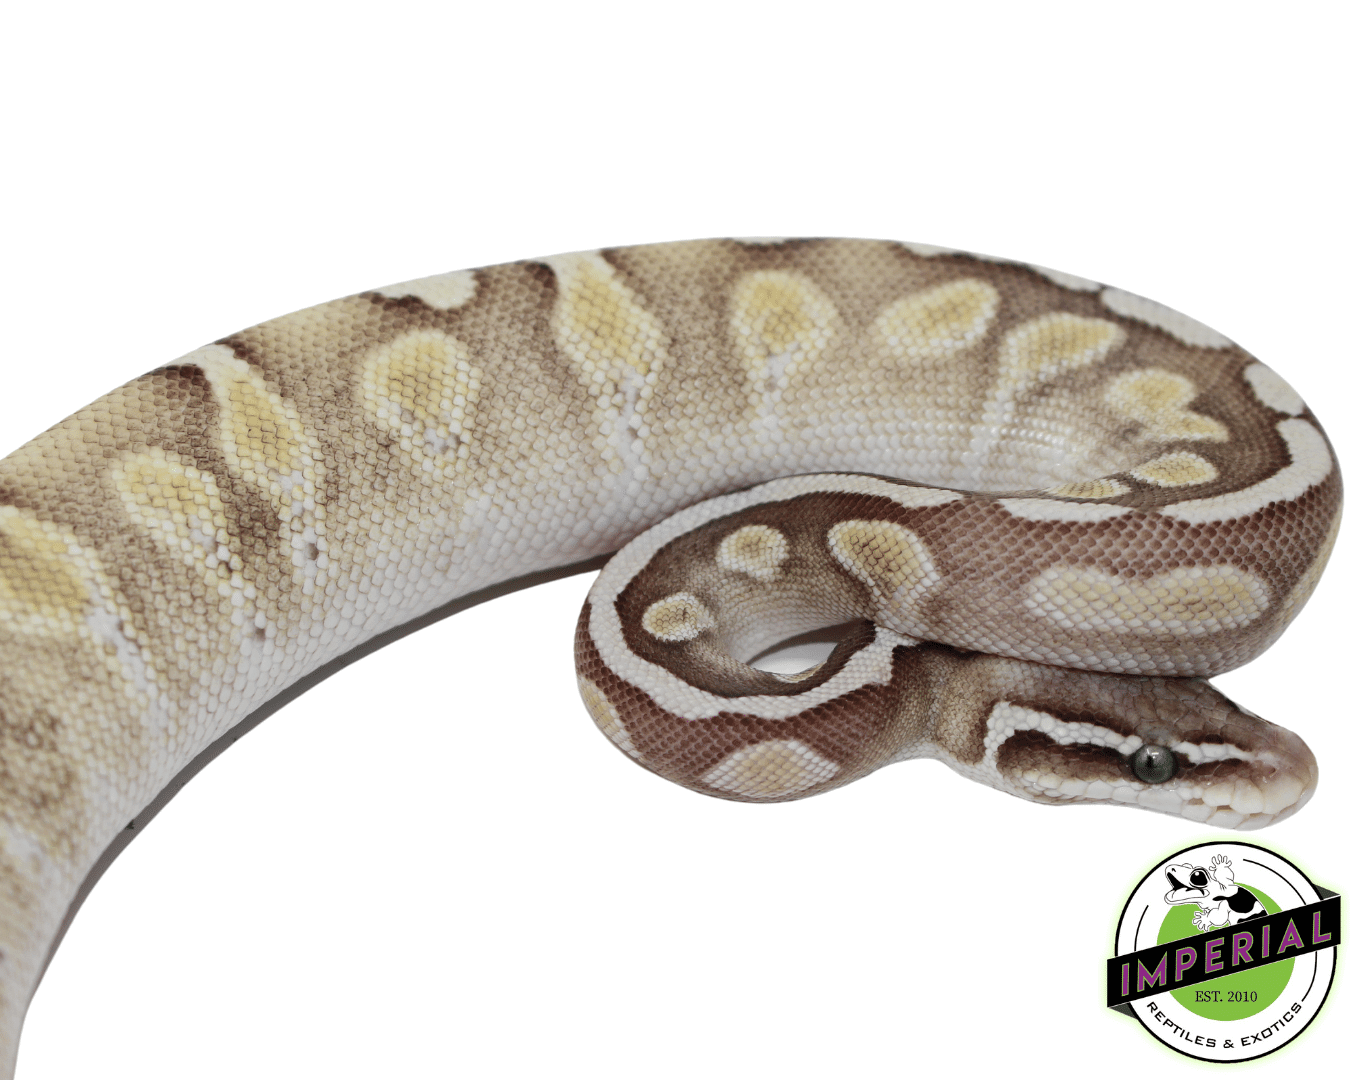 ghi lesser enchi ball python for sale online, buy ball pythons near me at cheap prices